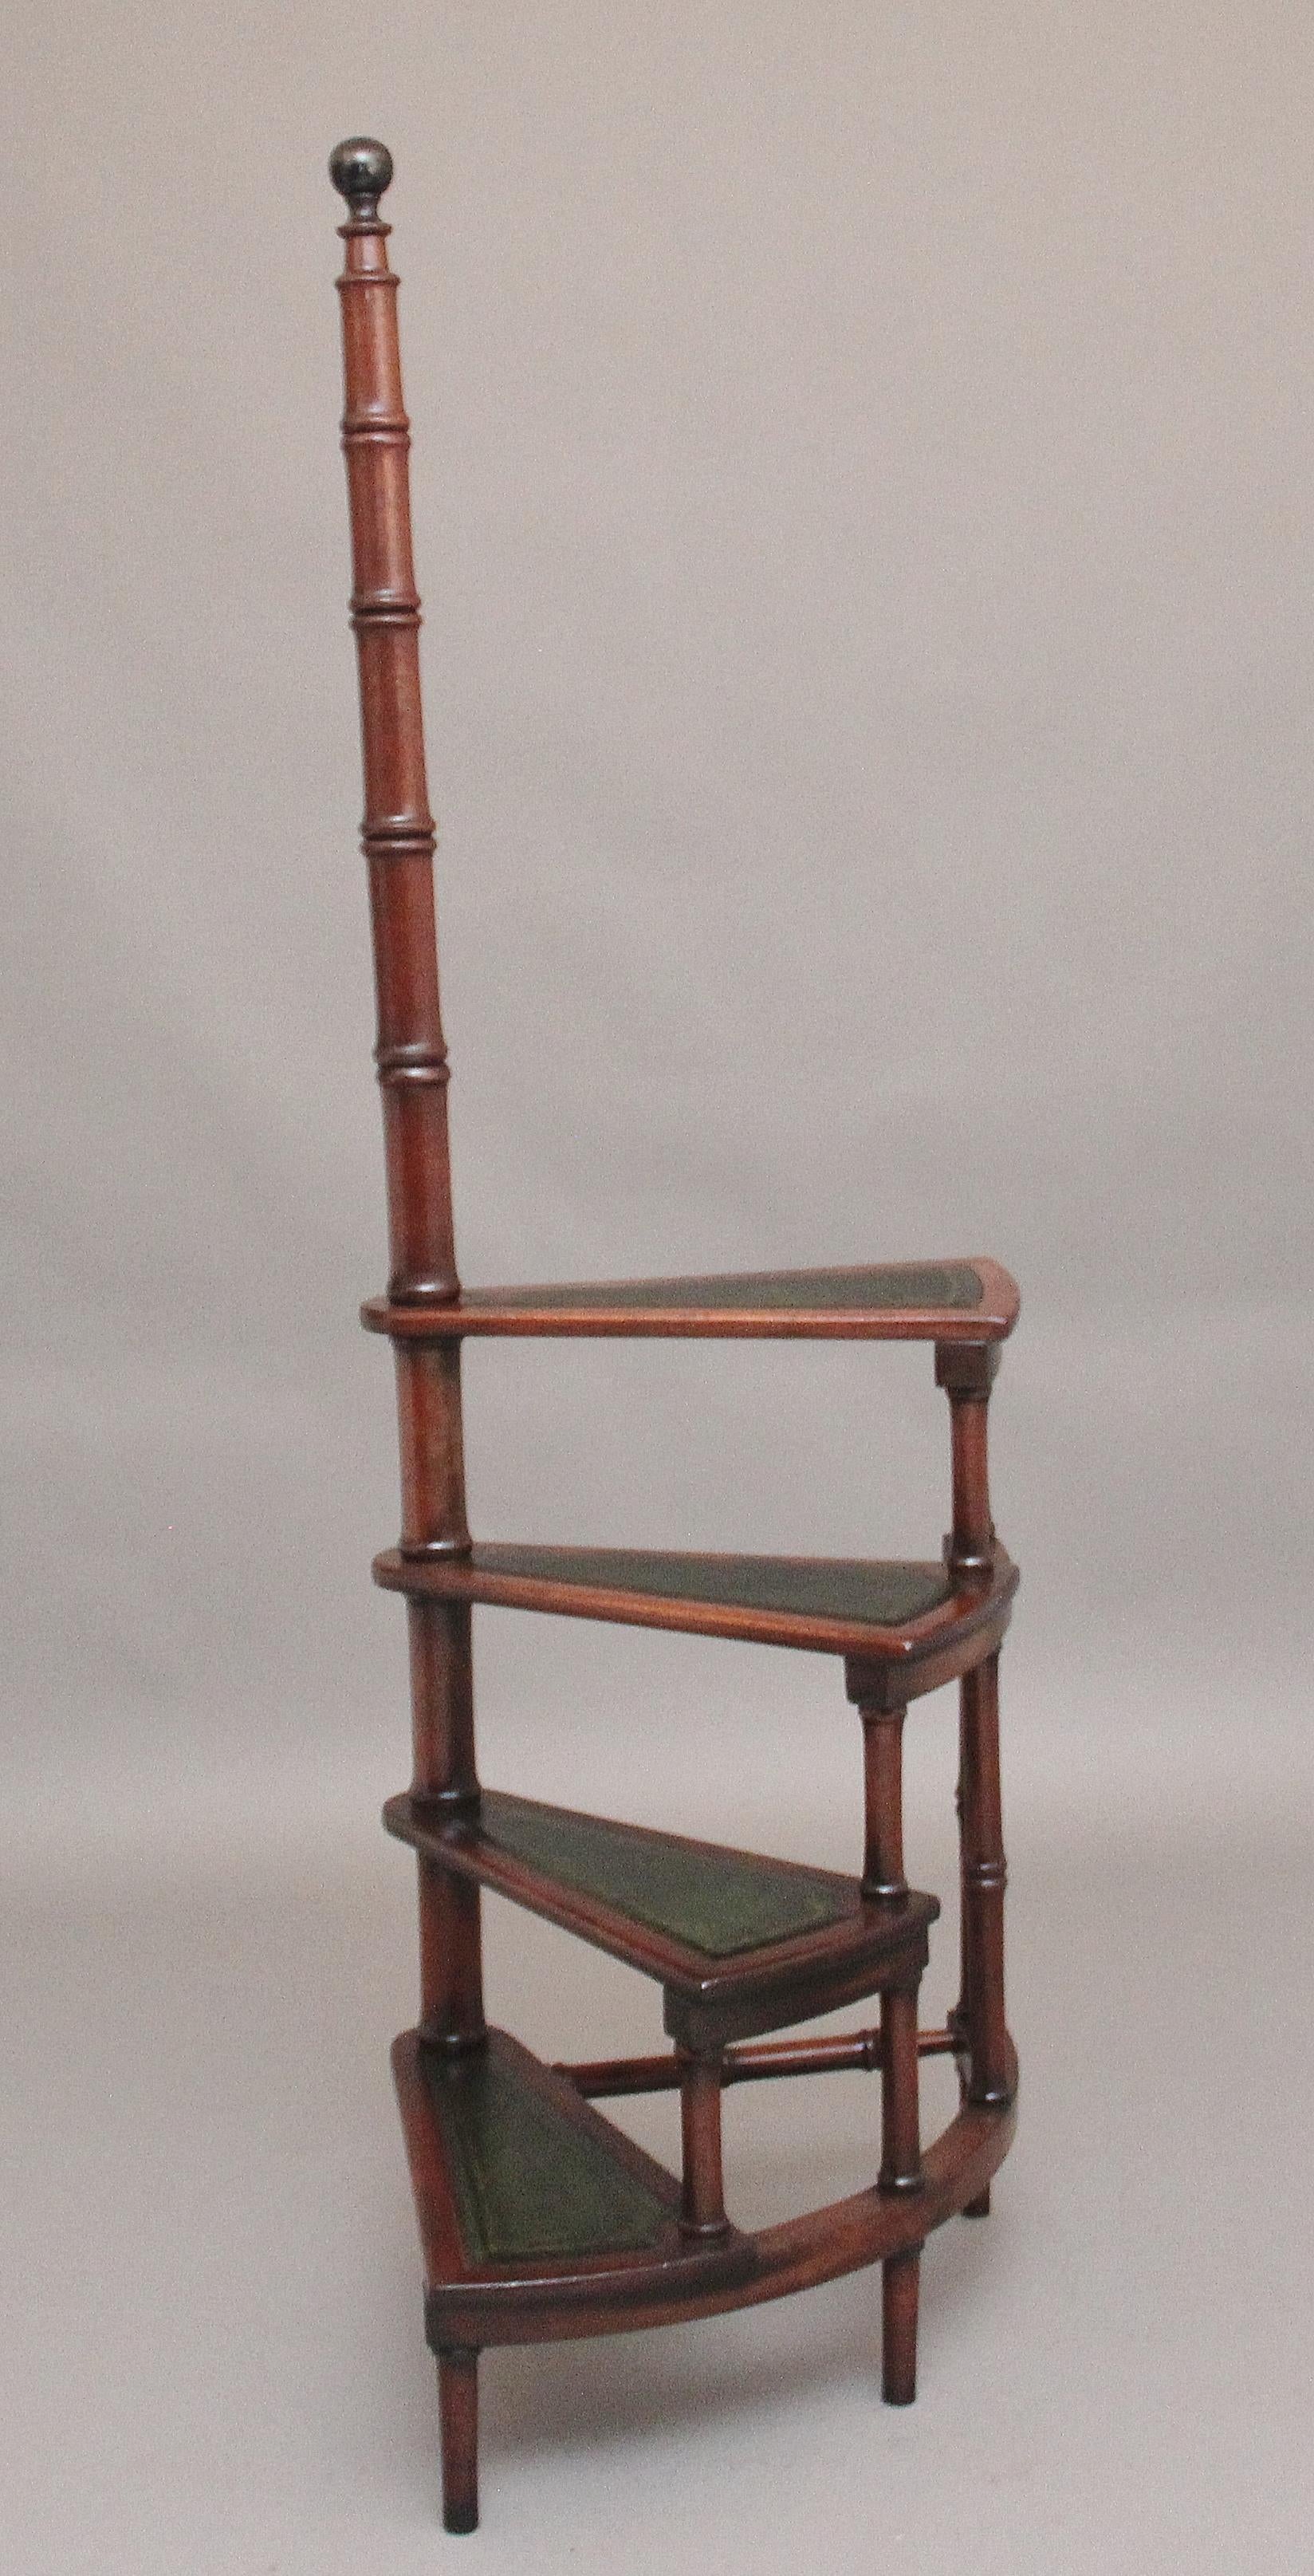 A set of mid 20th Century mahogany library steps, consisting of four steps with each step lined with a green leather decorated with blind and gilt tooling, supported on a tall turn column with an ebonised turned knob at the top, with various turned